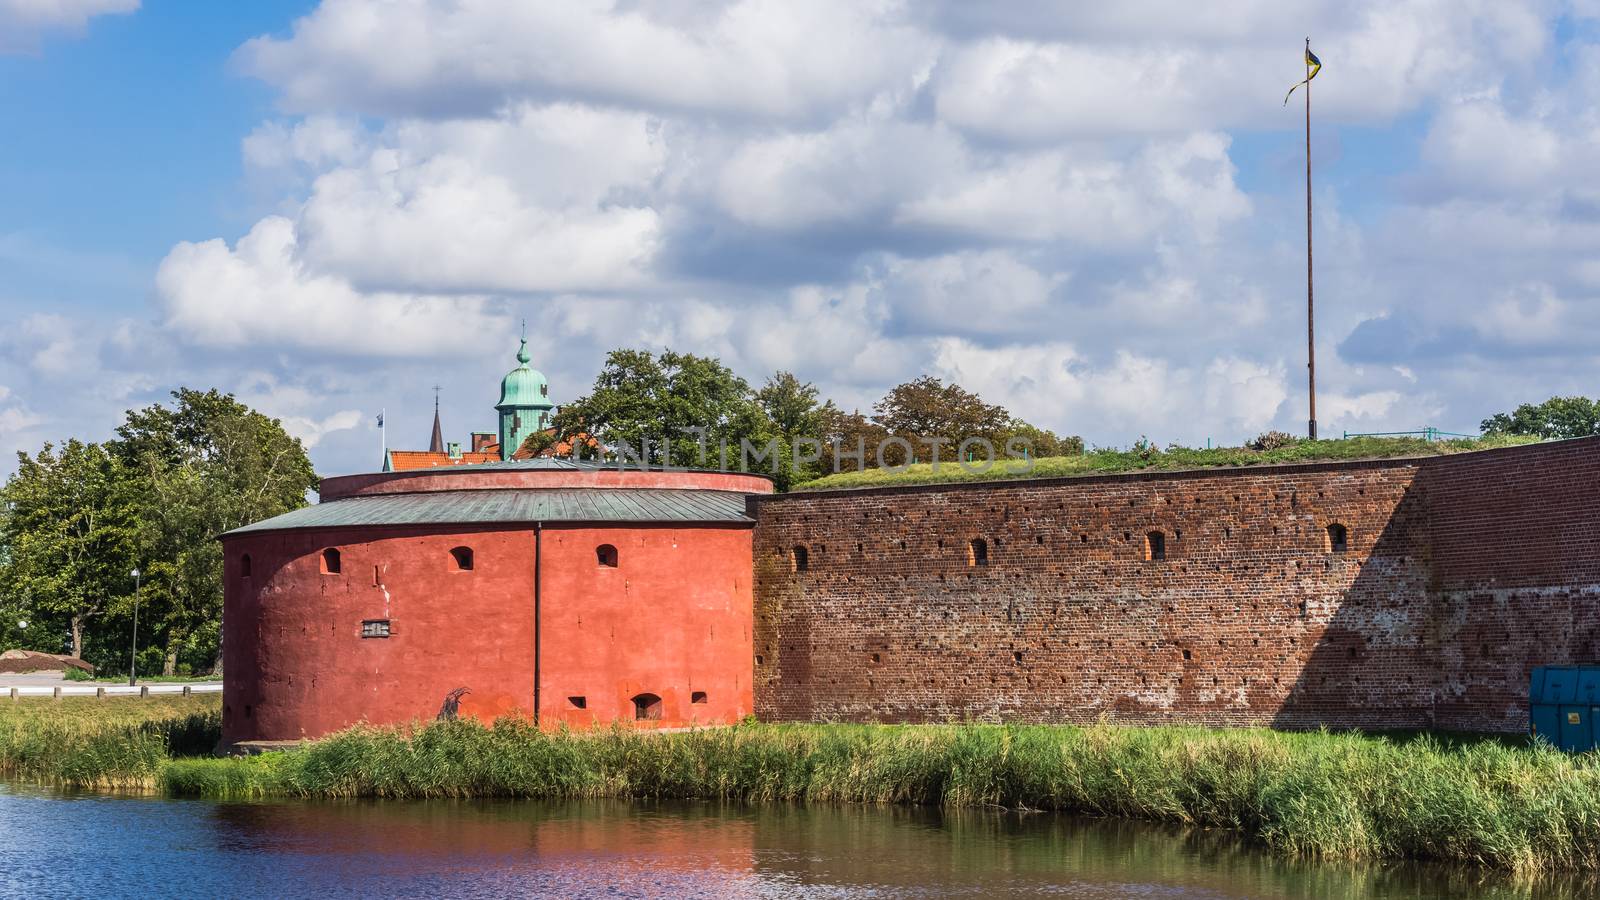 Part of Malmo Castle ( Malmöhus) in Malmo, Sweden. Old fortress founded in 1434 by King Eric of Pomerania, demolished and rebuilt in early 16th century, main landmark of the city.